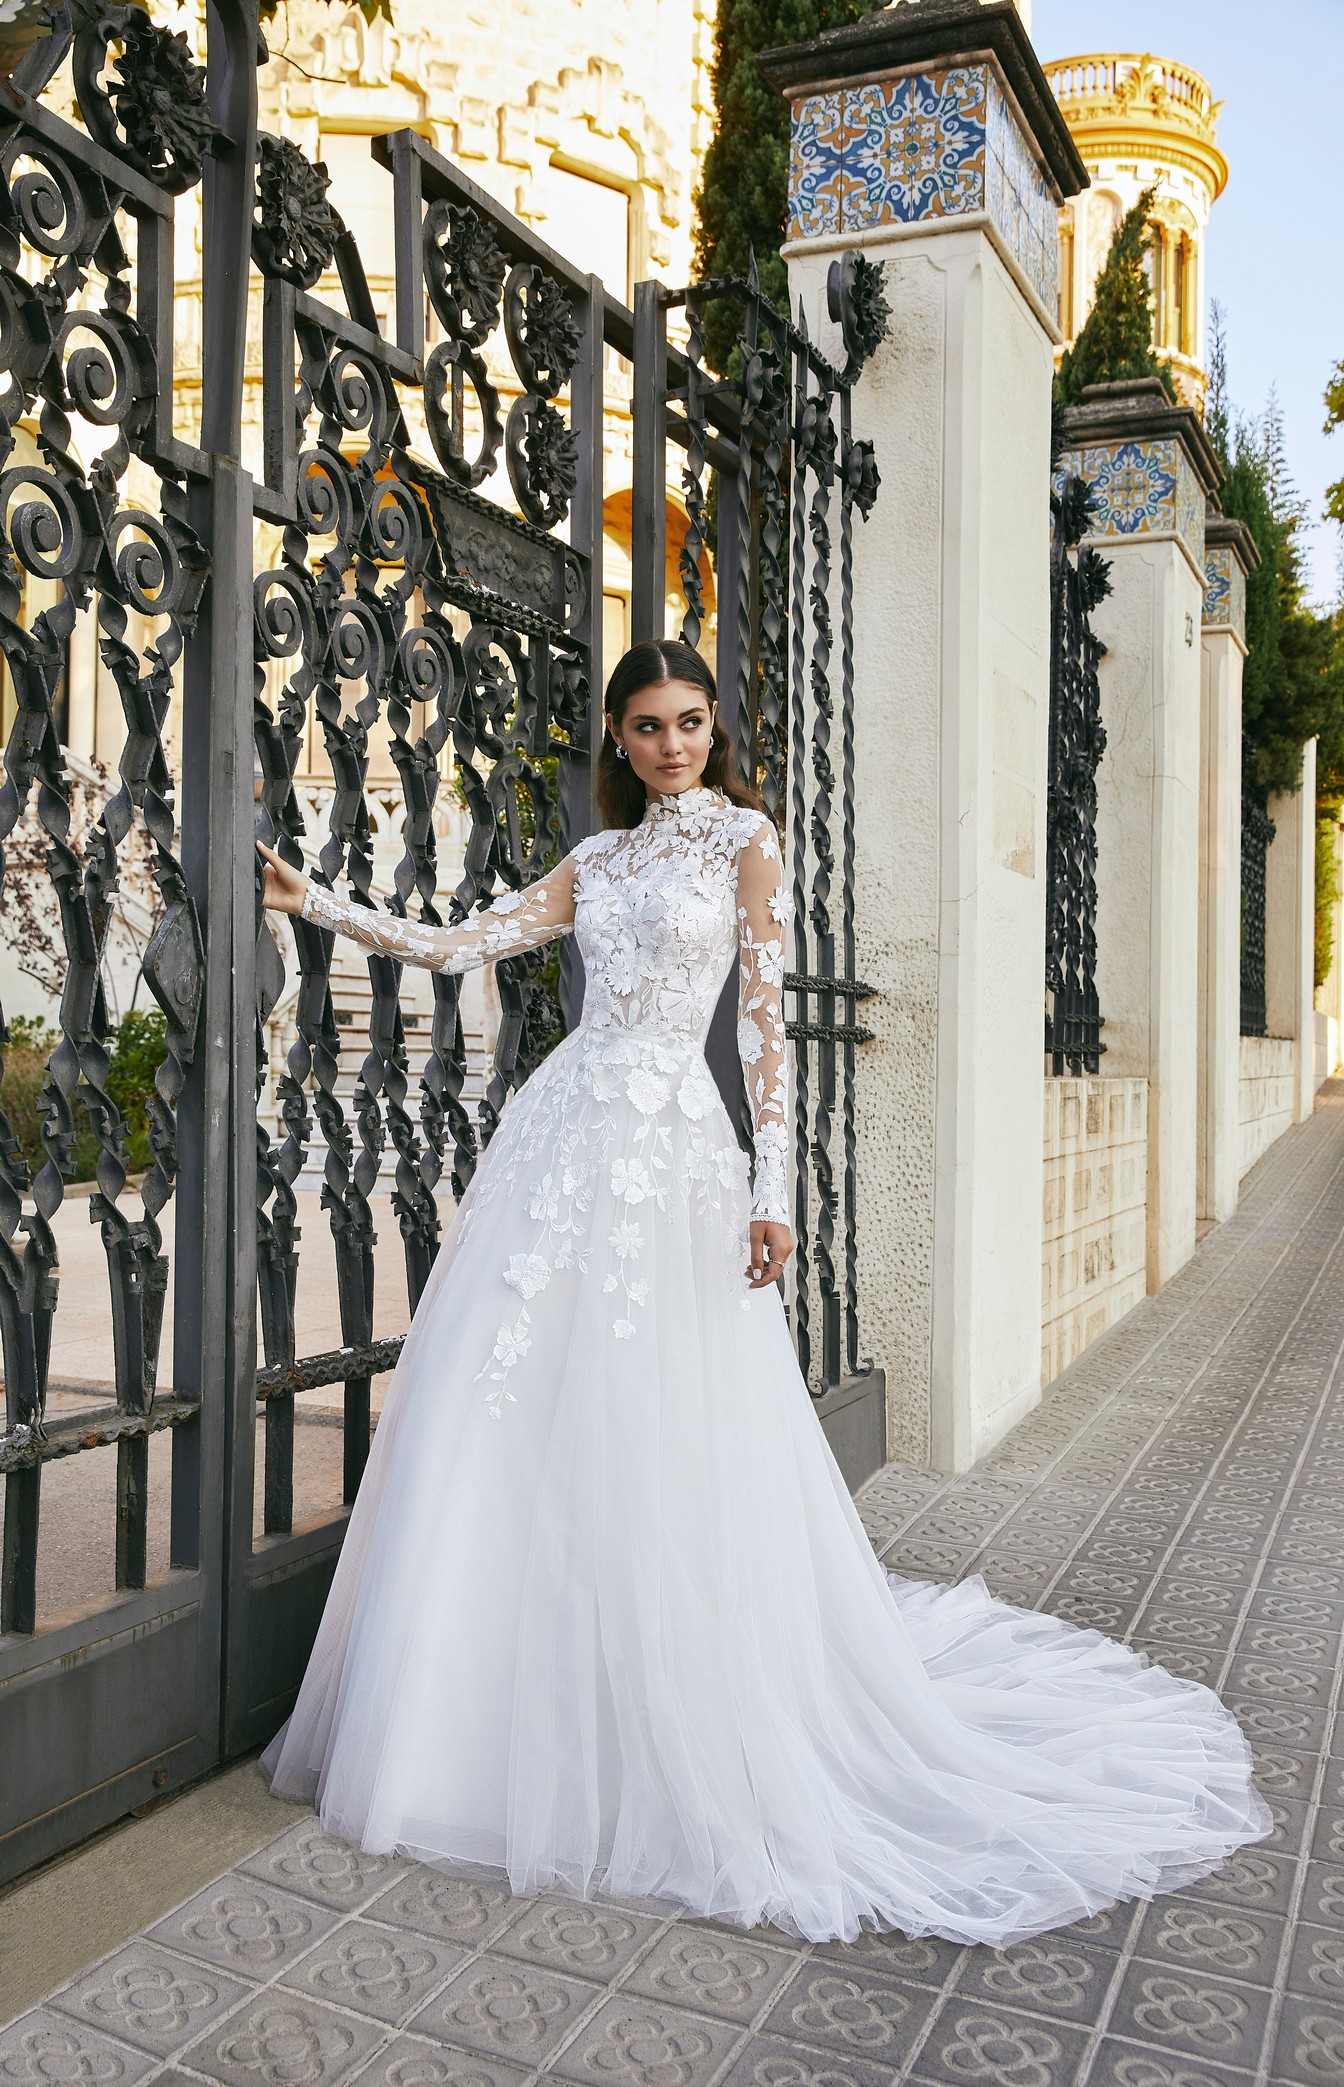 Brunette lady standing in front of ornate cast iron gates wearing princess ballgown style wedding dress with full sleeves and 3D floral detail